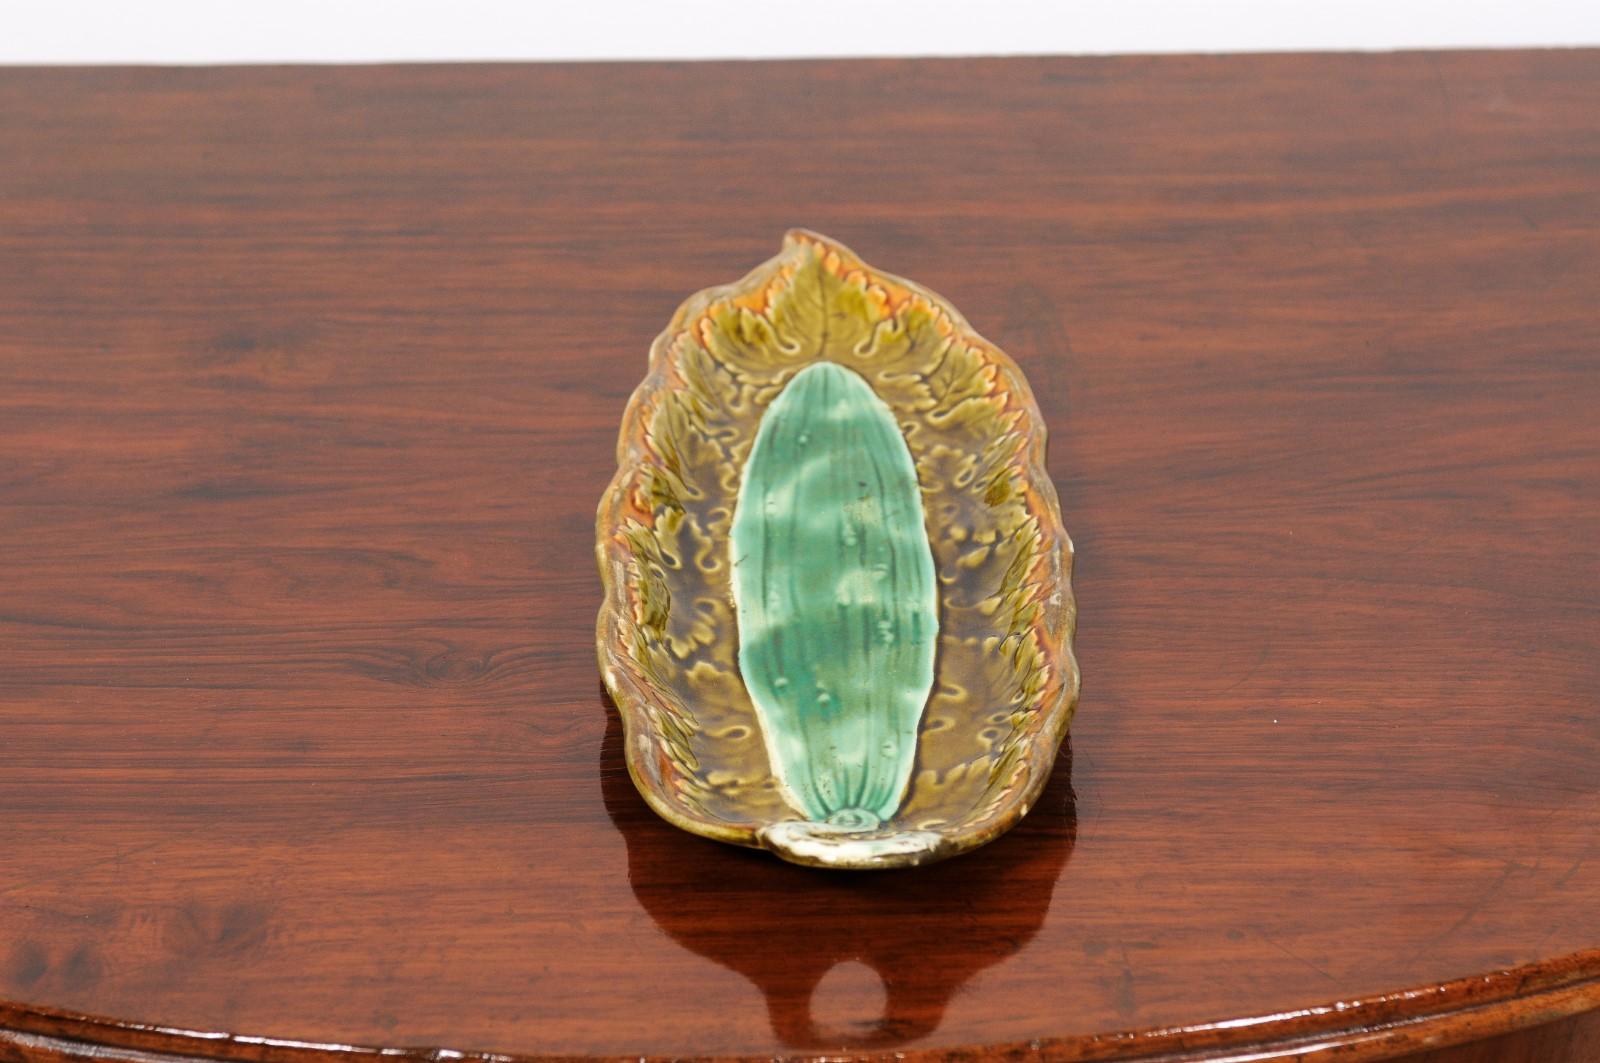 French 19th Century Majolica Pickle or Cucumber Plate with Yellow and Green 7